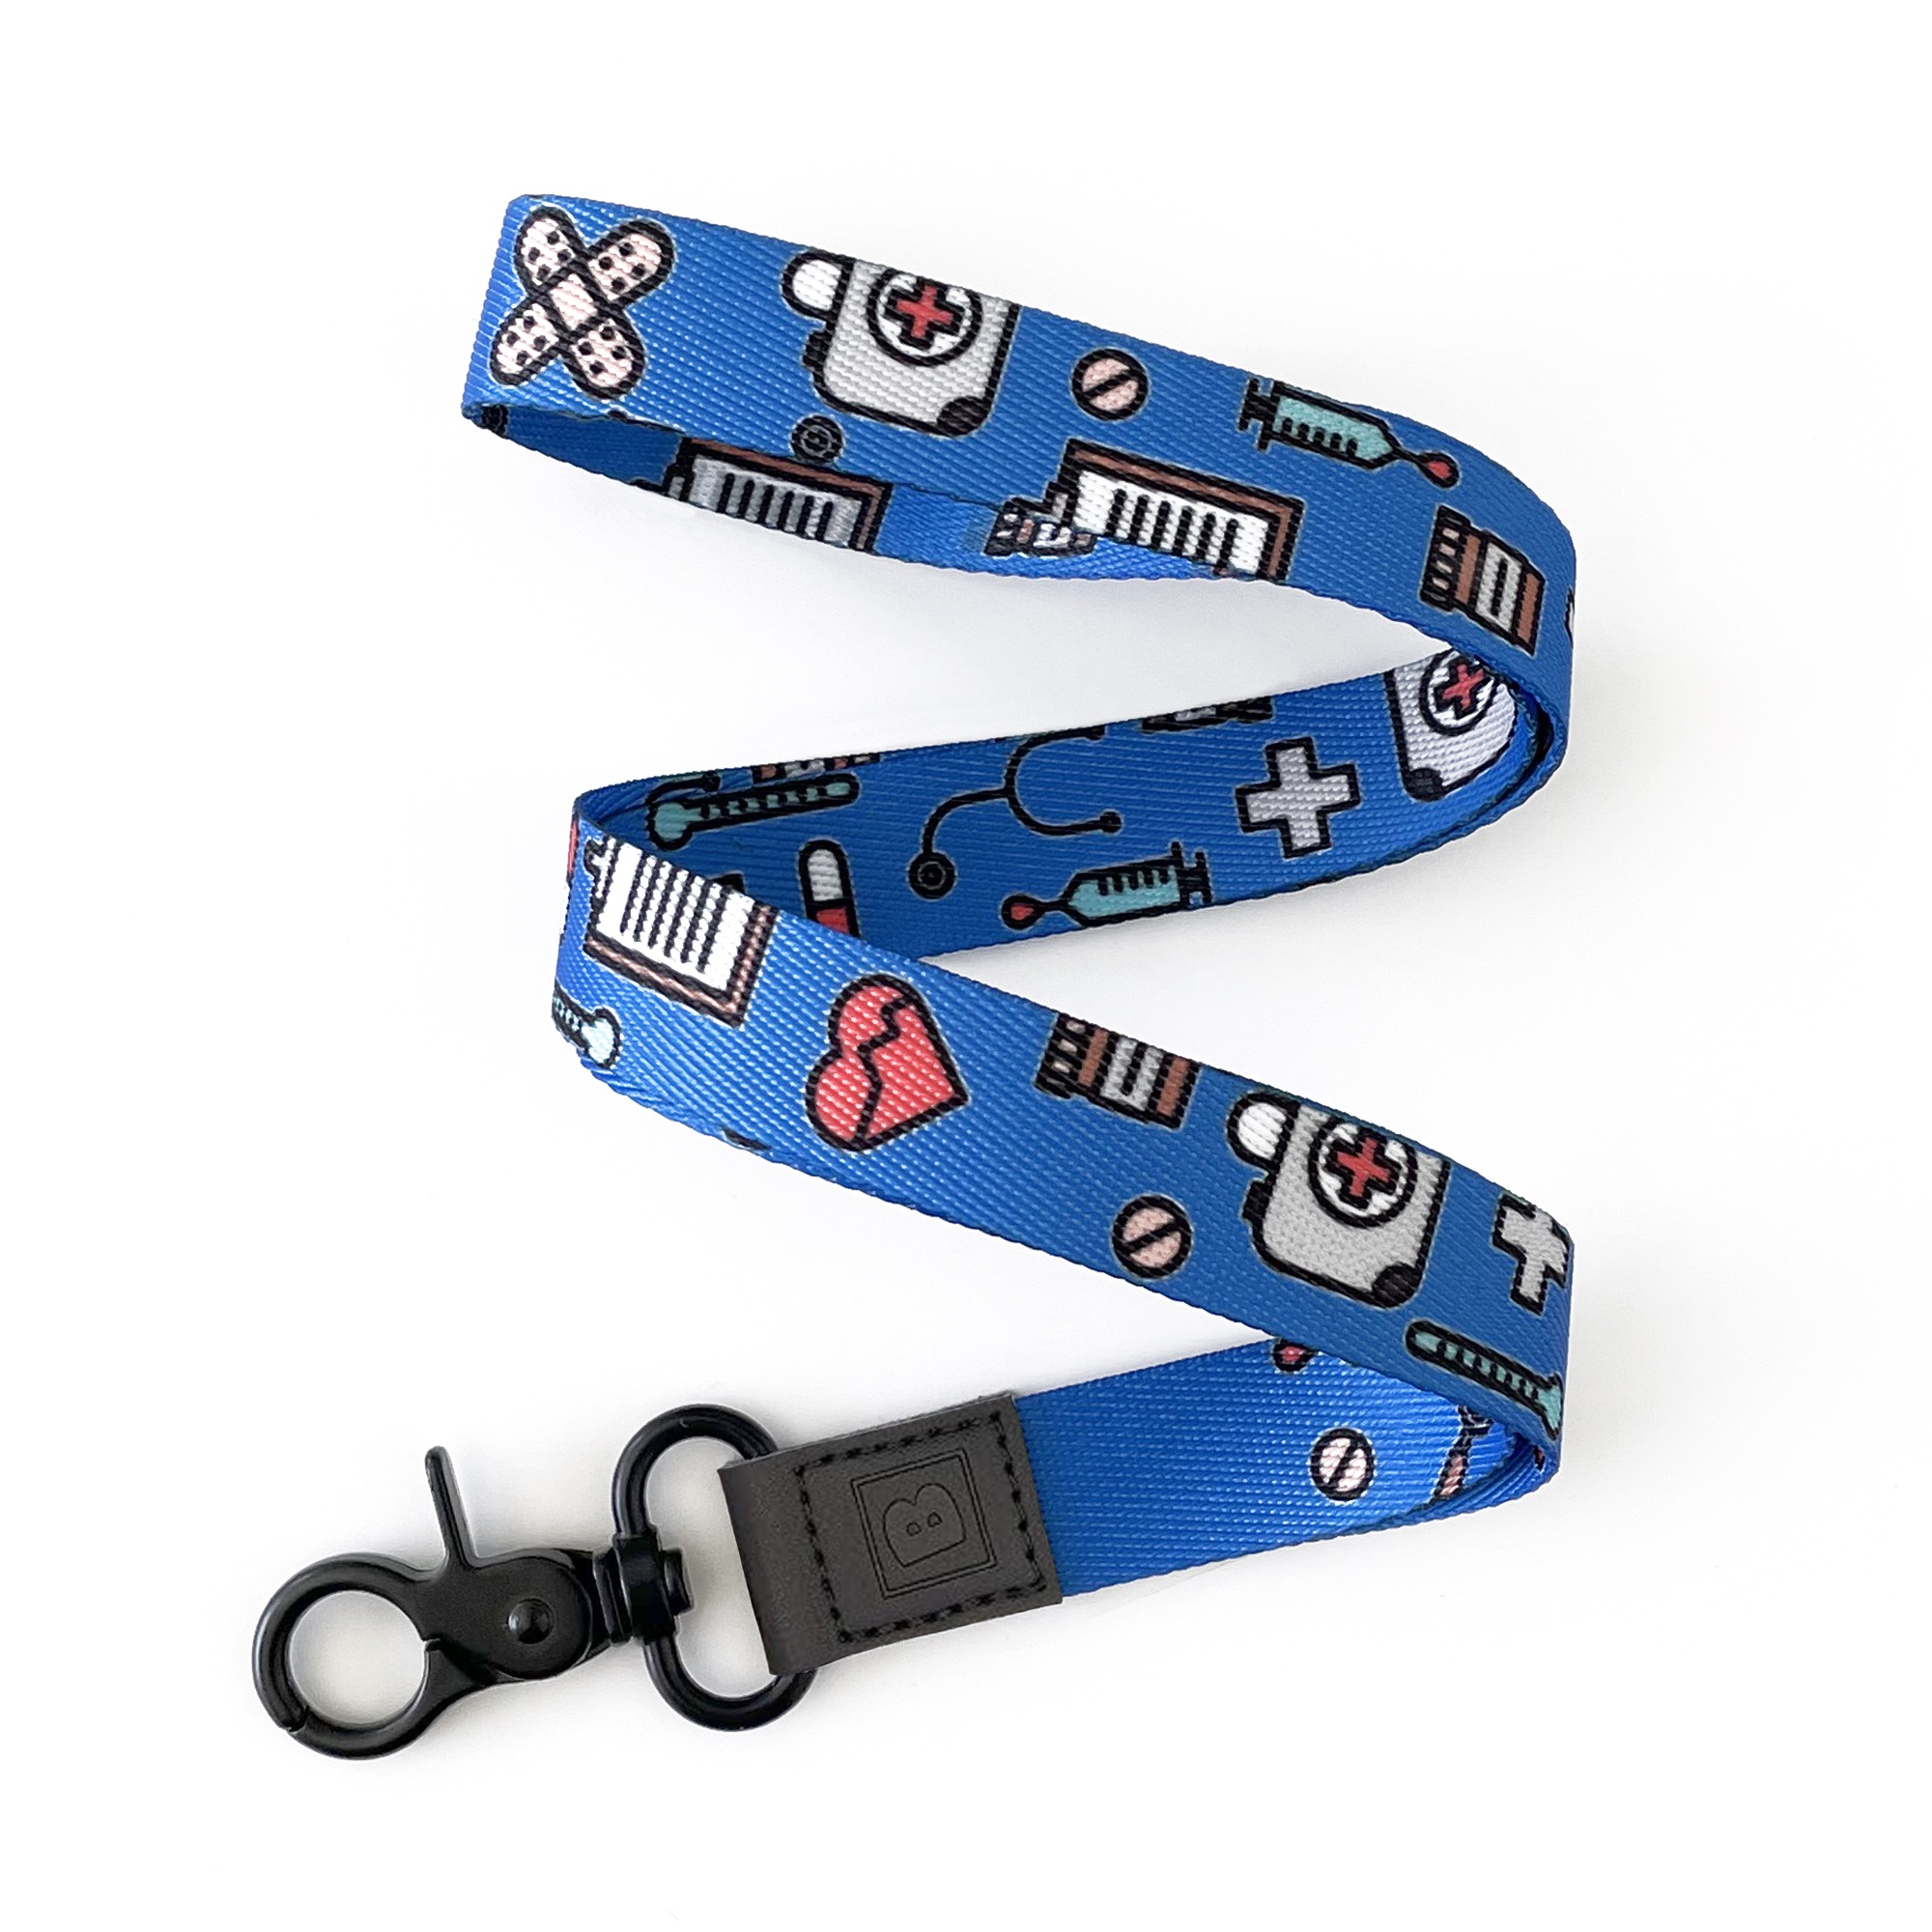 Medical Marvel: Blue Lanyard with Iconic Medical Pattern – Show Your Passion for Healthcare! by BadgeZoo